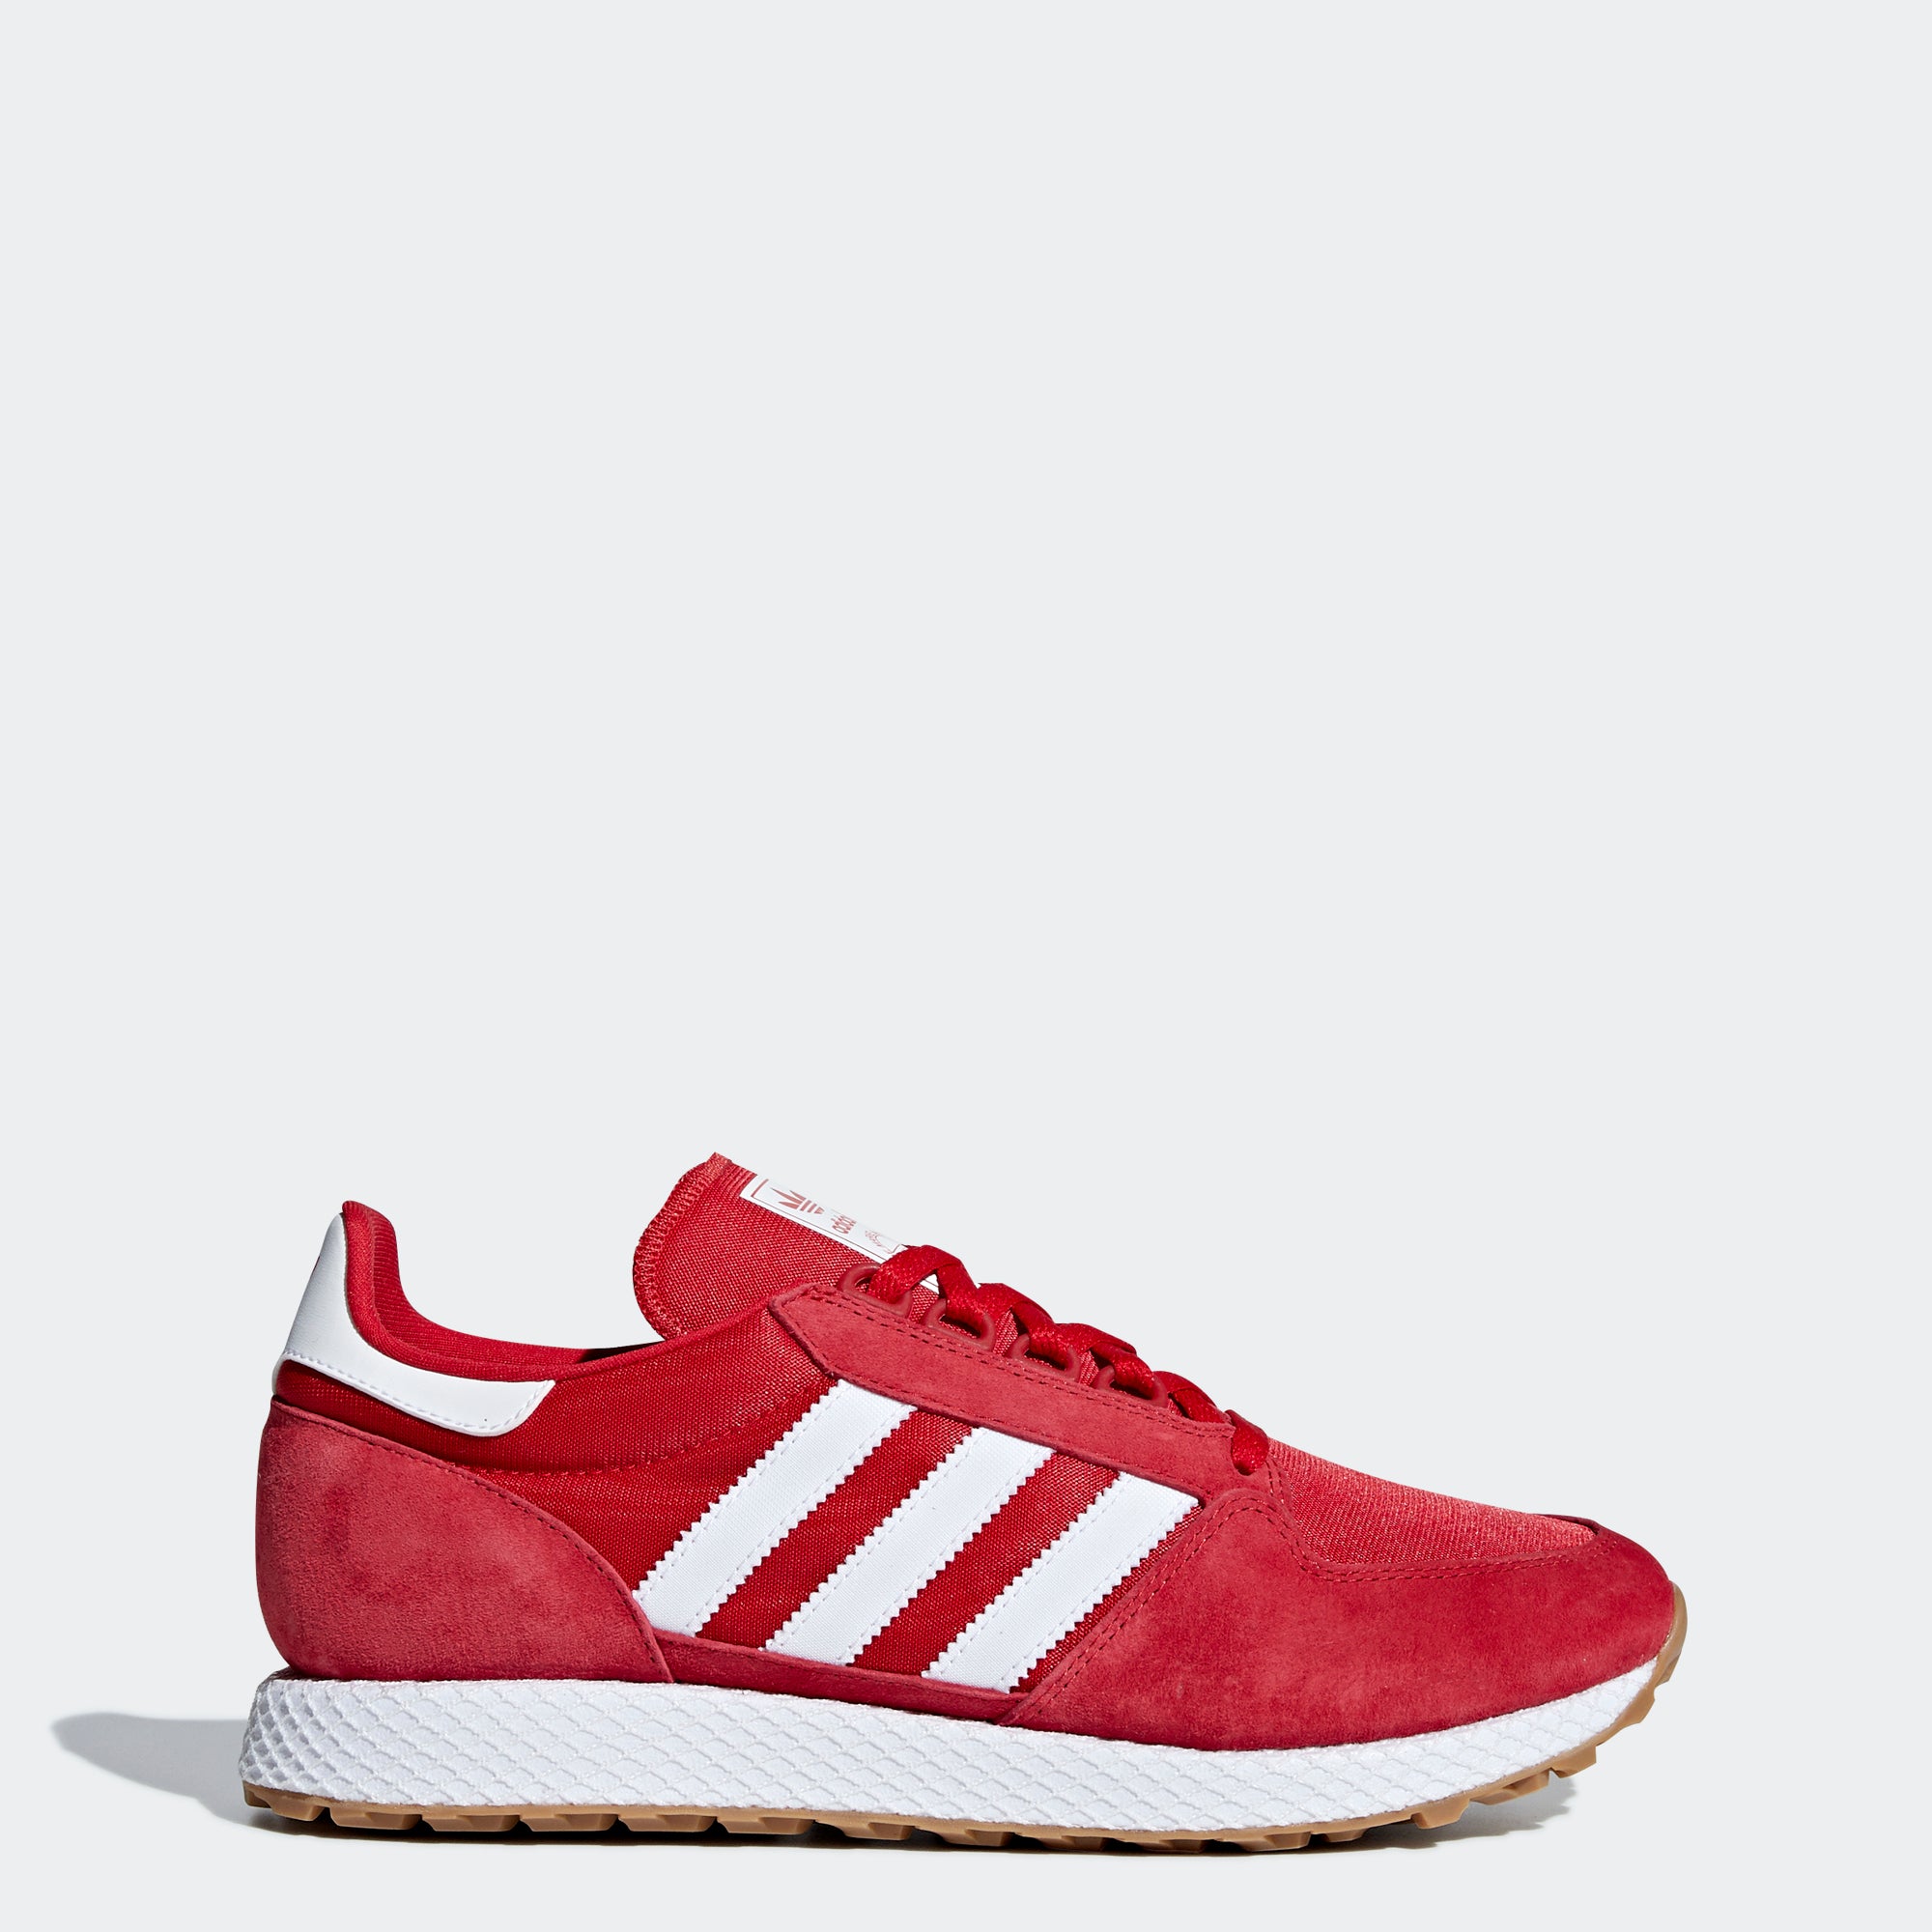 adidas Grove Shoes Scarlet Red B41530 | Chicago City Sports